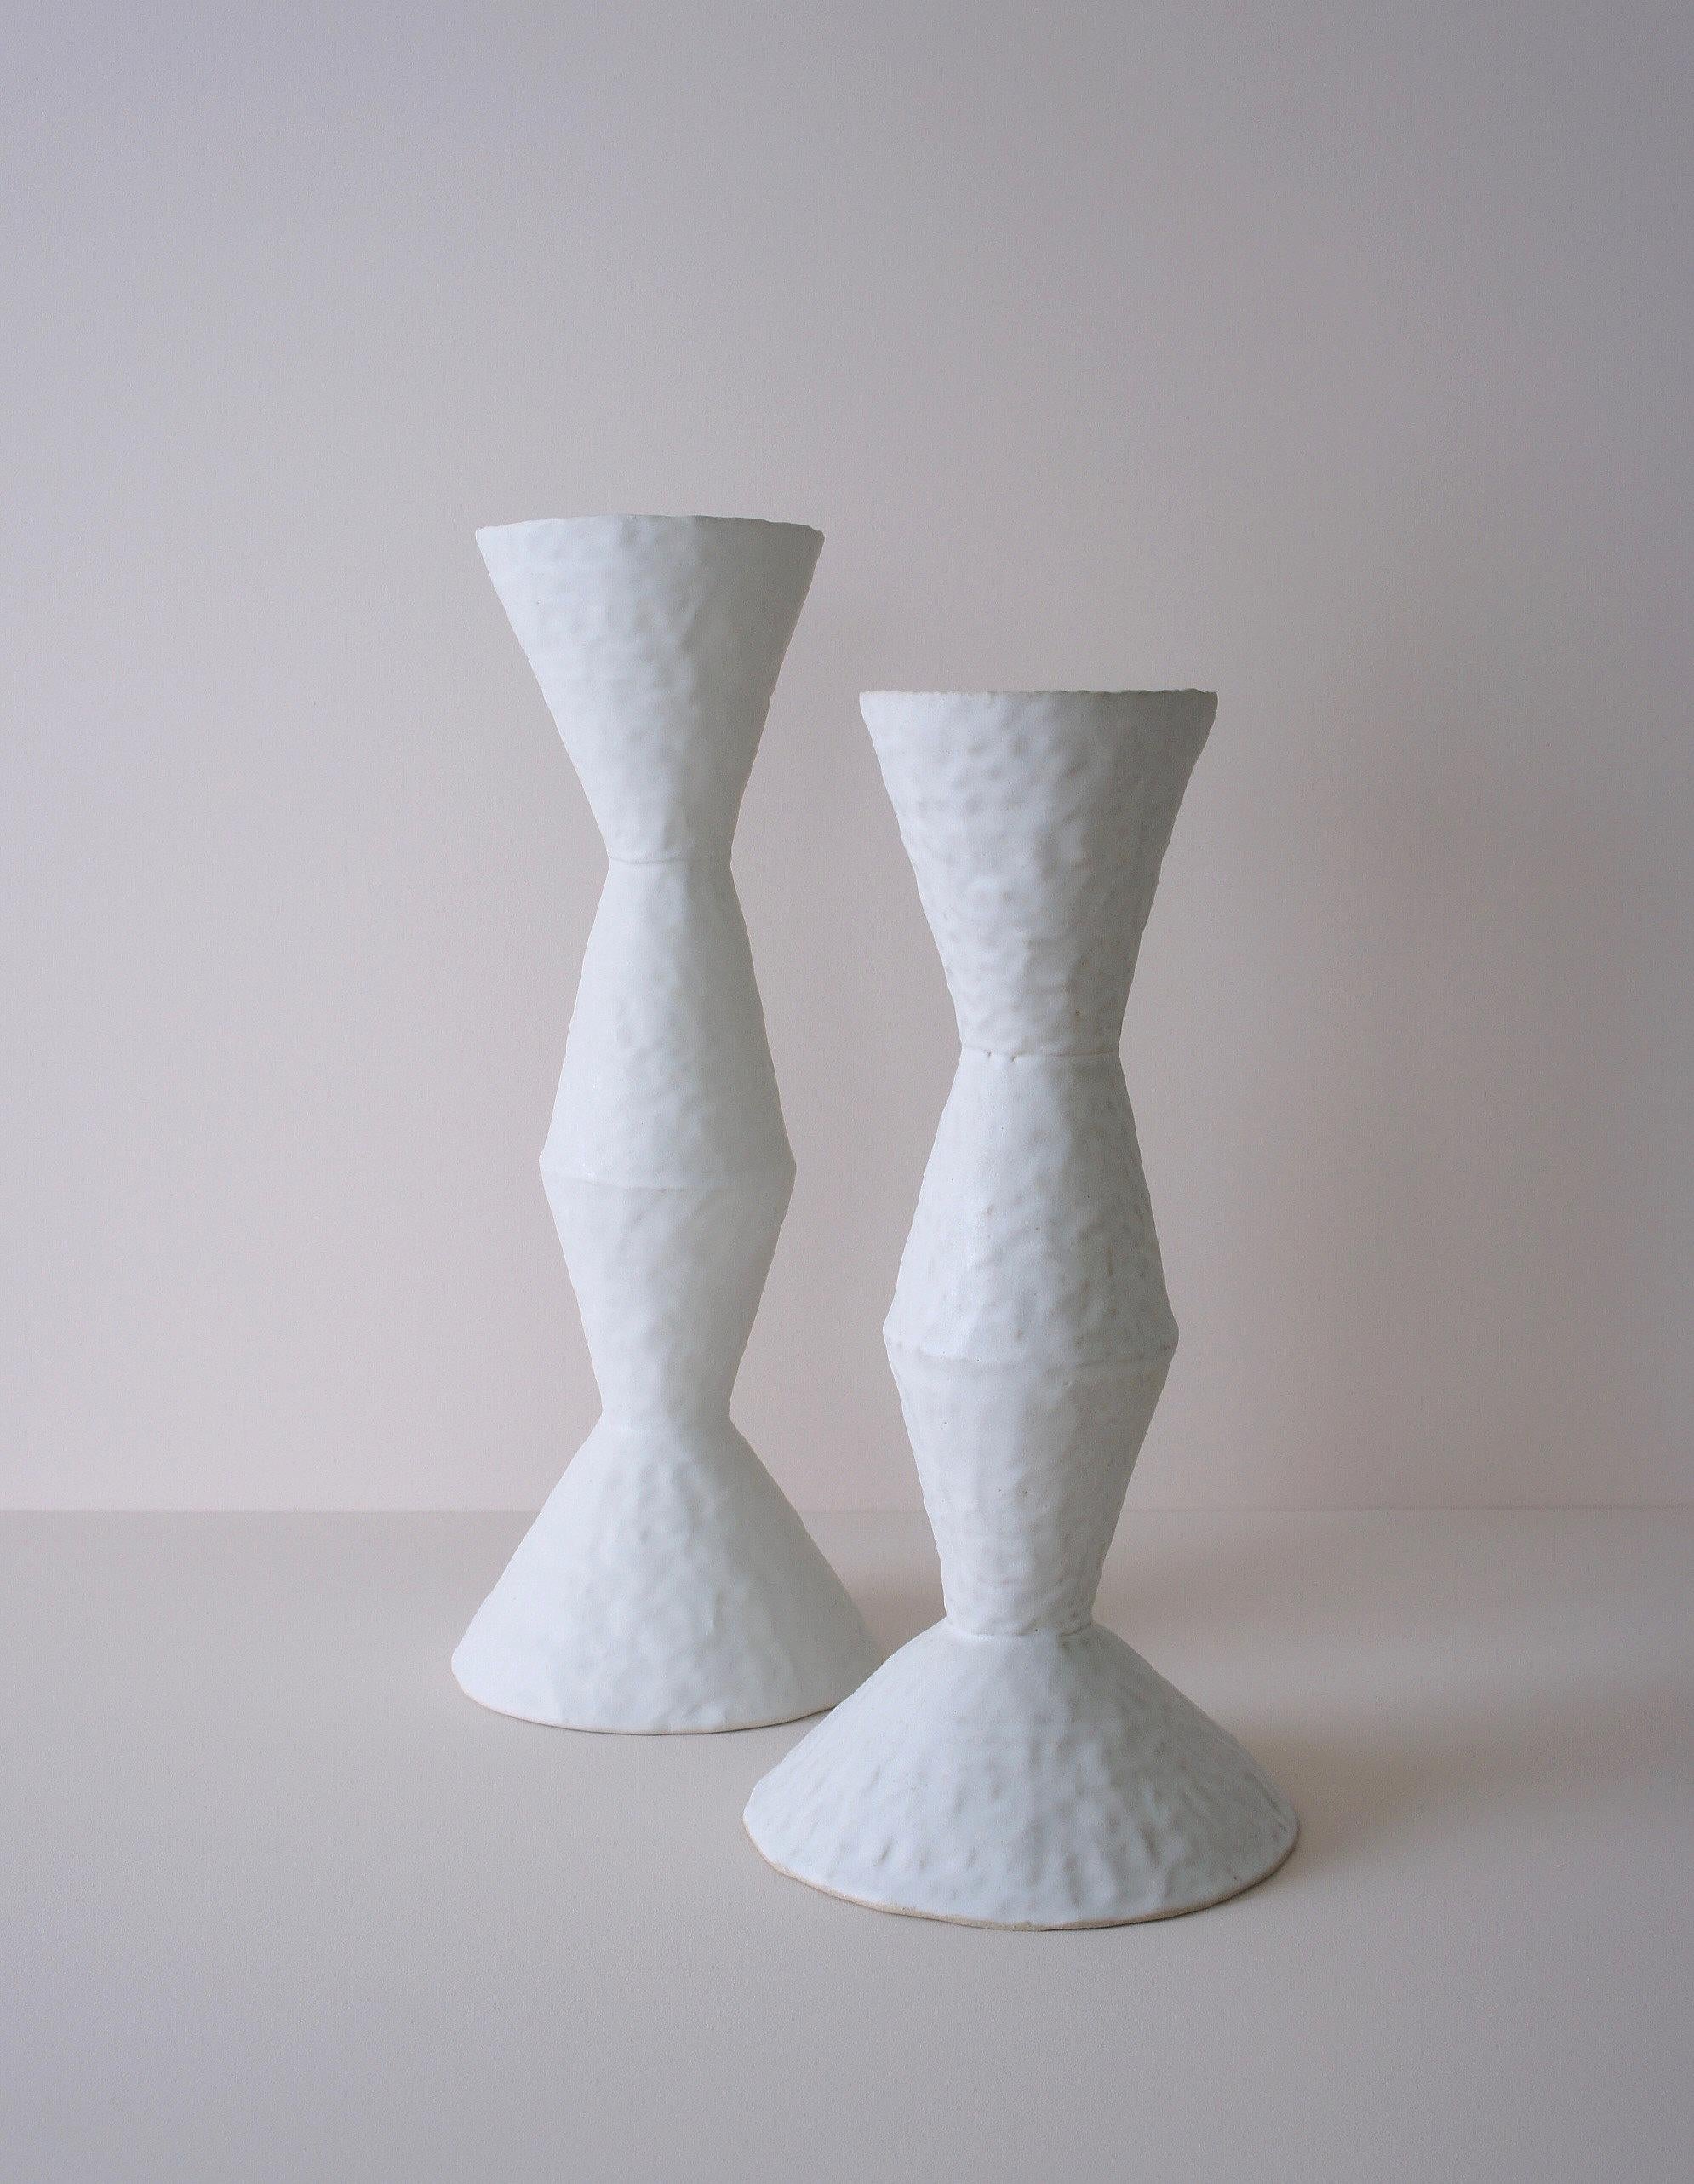 Giselle Hicks Contemporary White Ceramic Vase, 2019 In New Condition For Sale In New York, NY